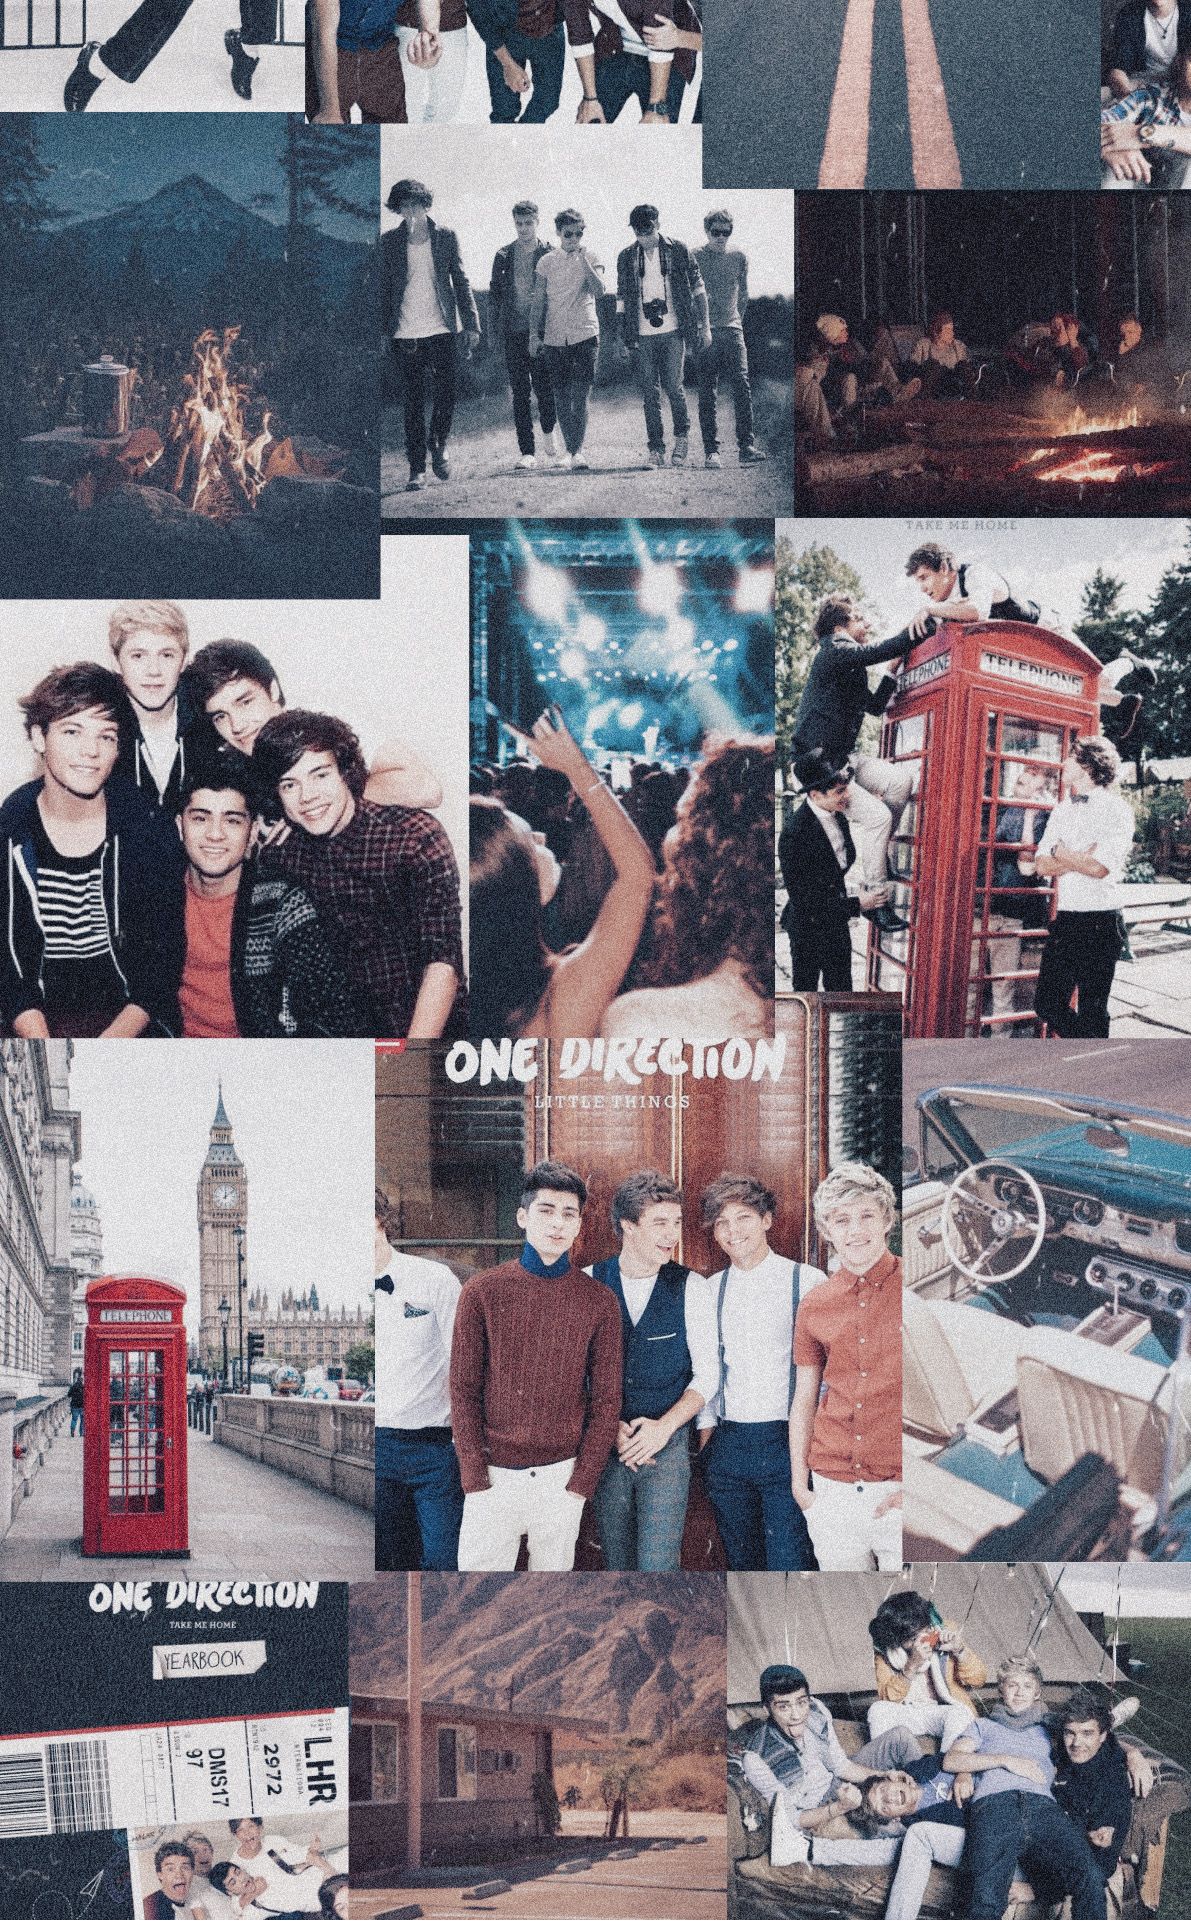 Take me home one direction wallpaper. One direction wallpaper, One direction picture, Home one direction